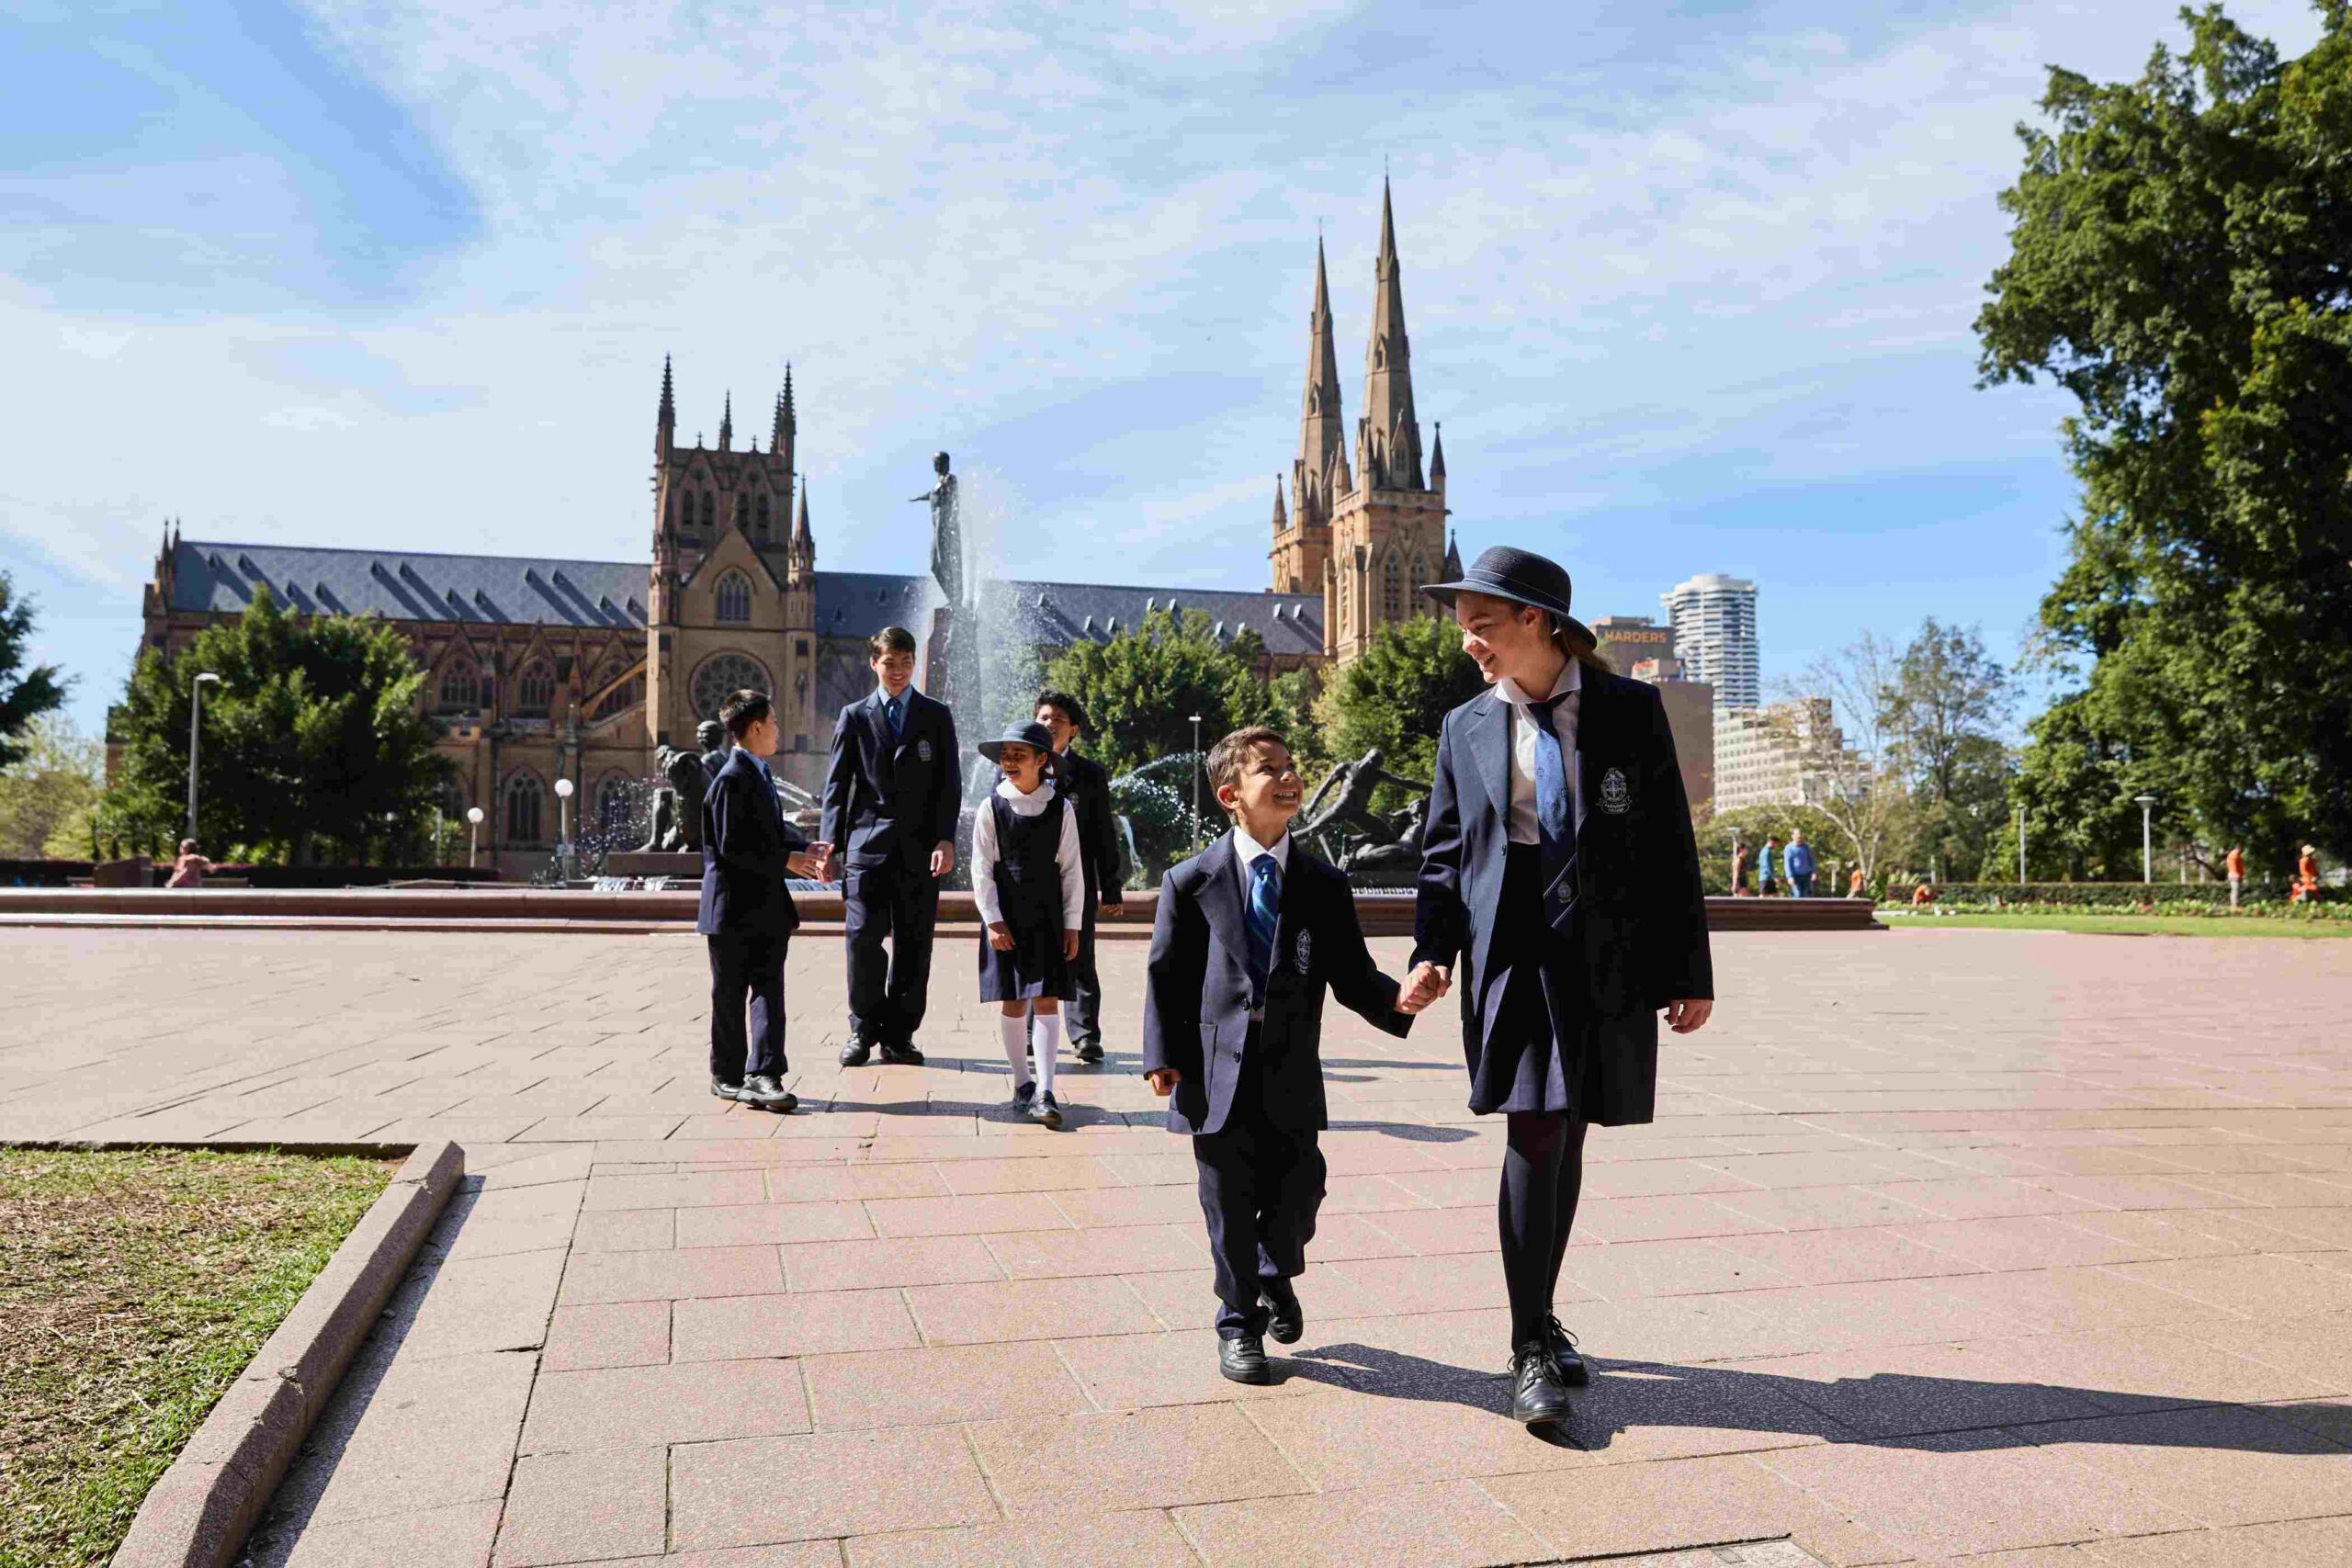 Male and female students walk near the fountain in Hyde Park with the beautiful St Mary's Cathedral in the background.